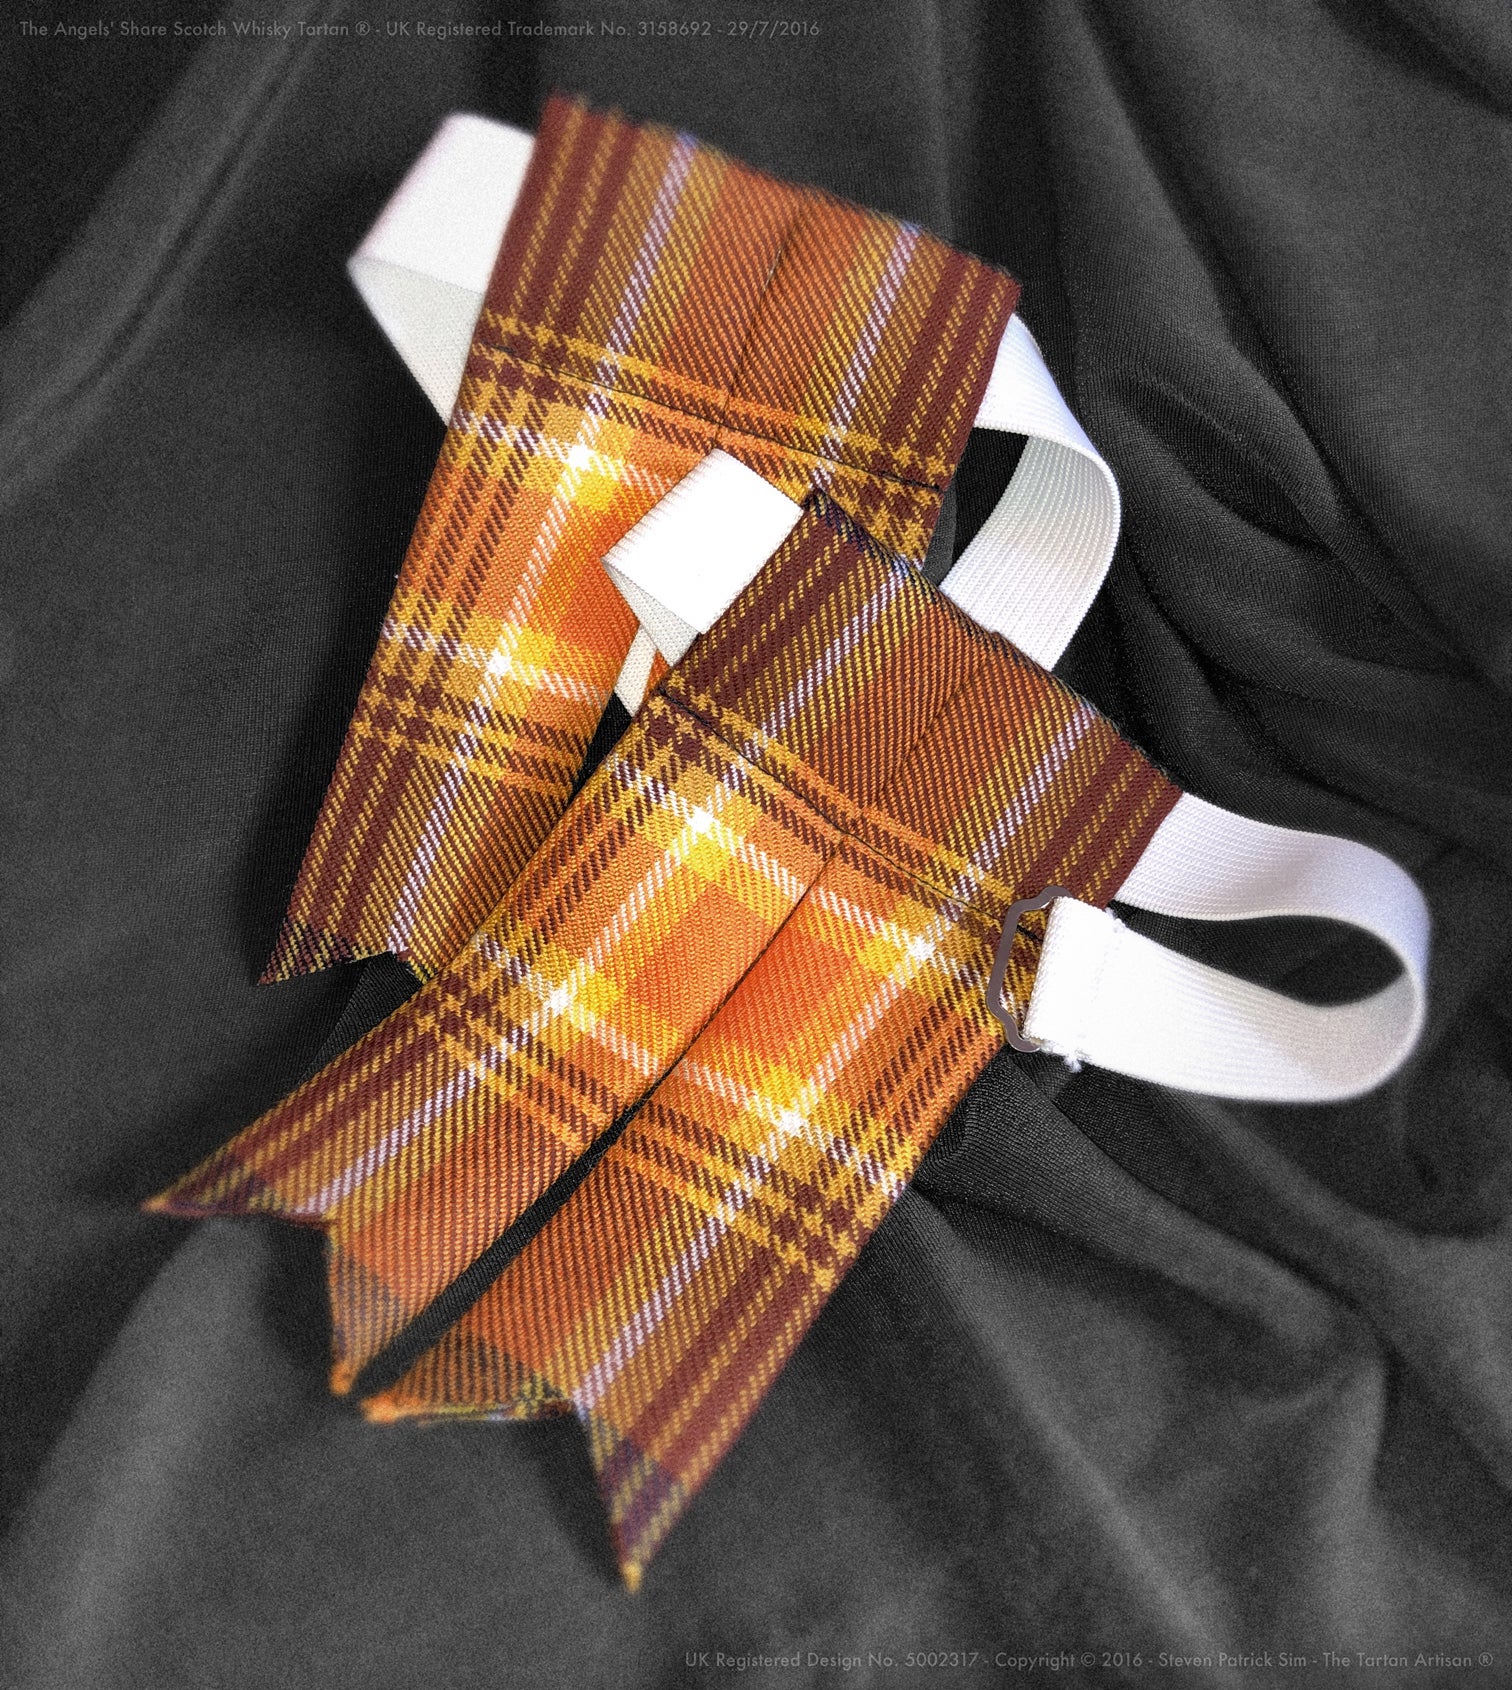 The Angels' Share Scotch Whisky Tartan Flashes and Garters by the Tartan Artisan®